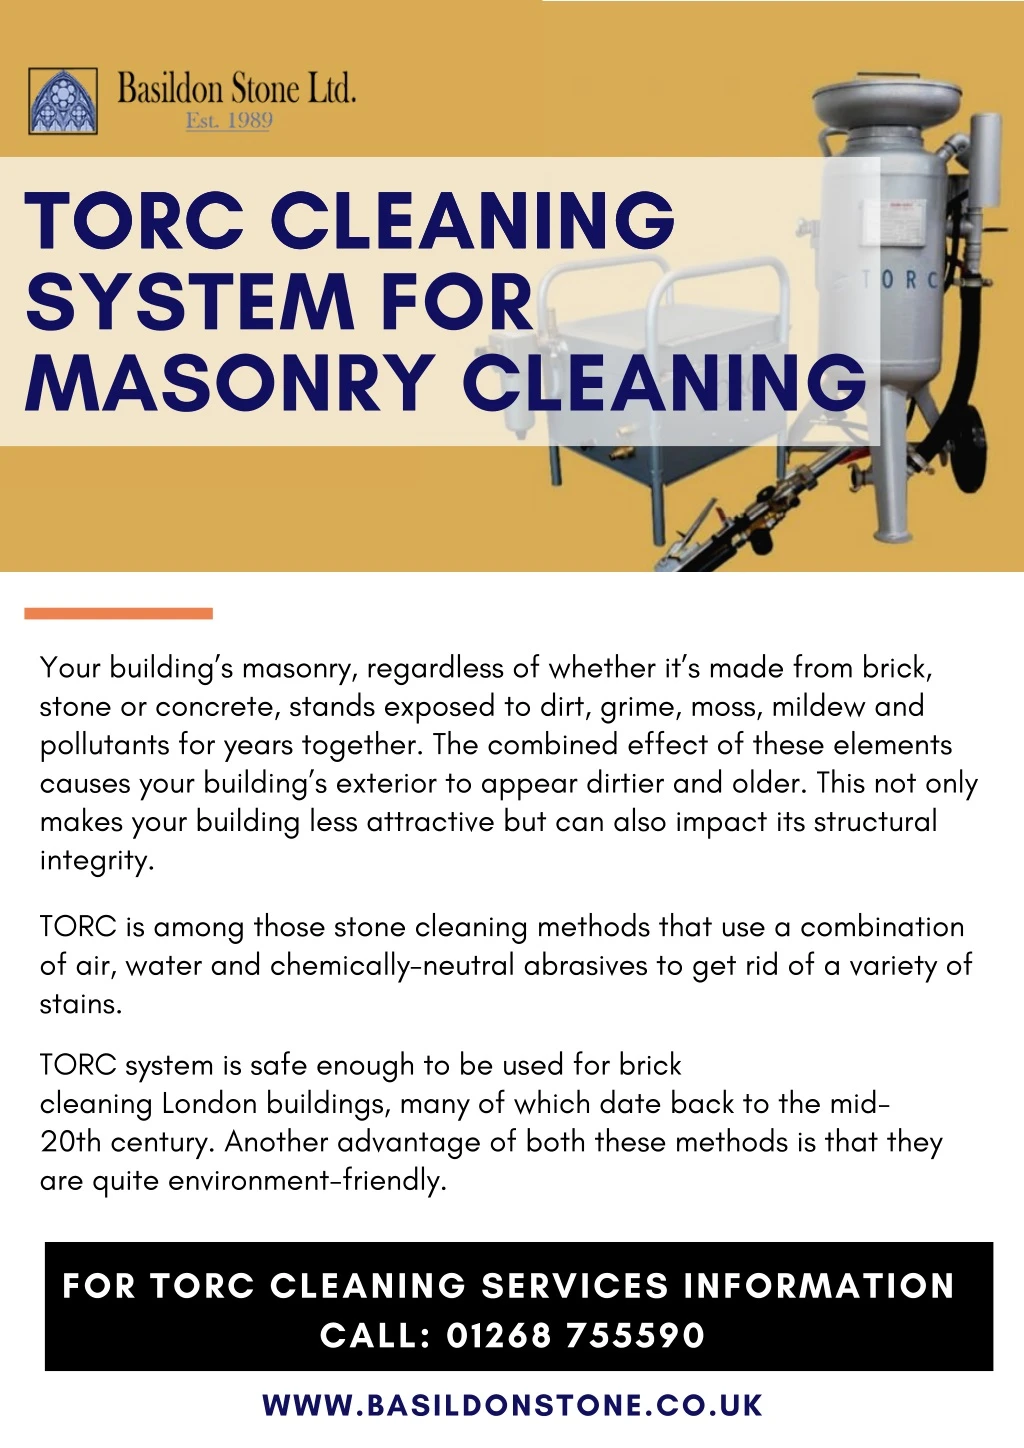 torc cleaning system for masonry cleaning